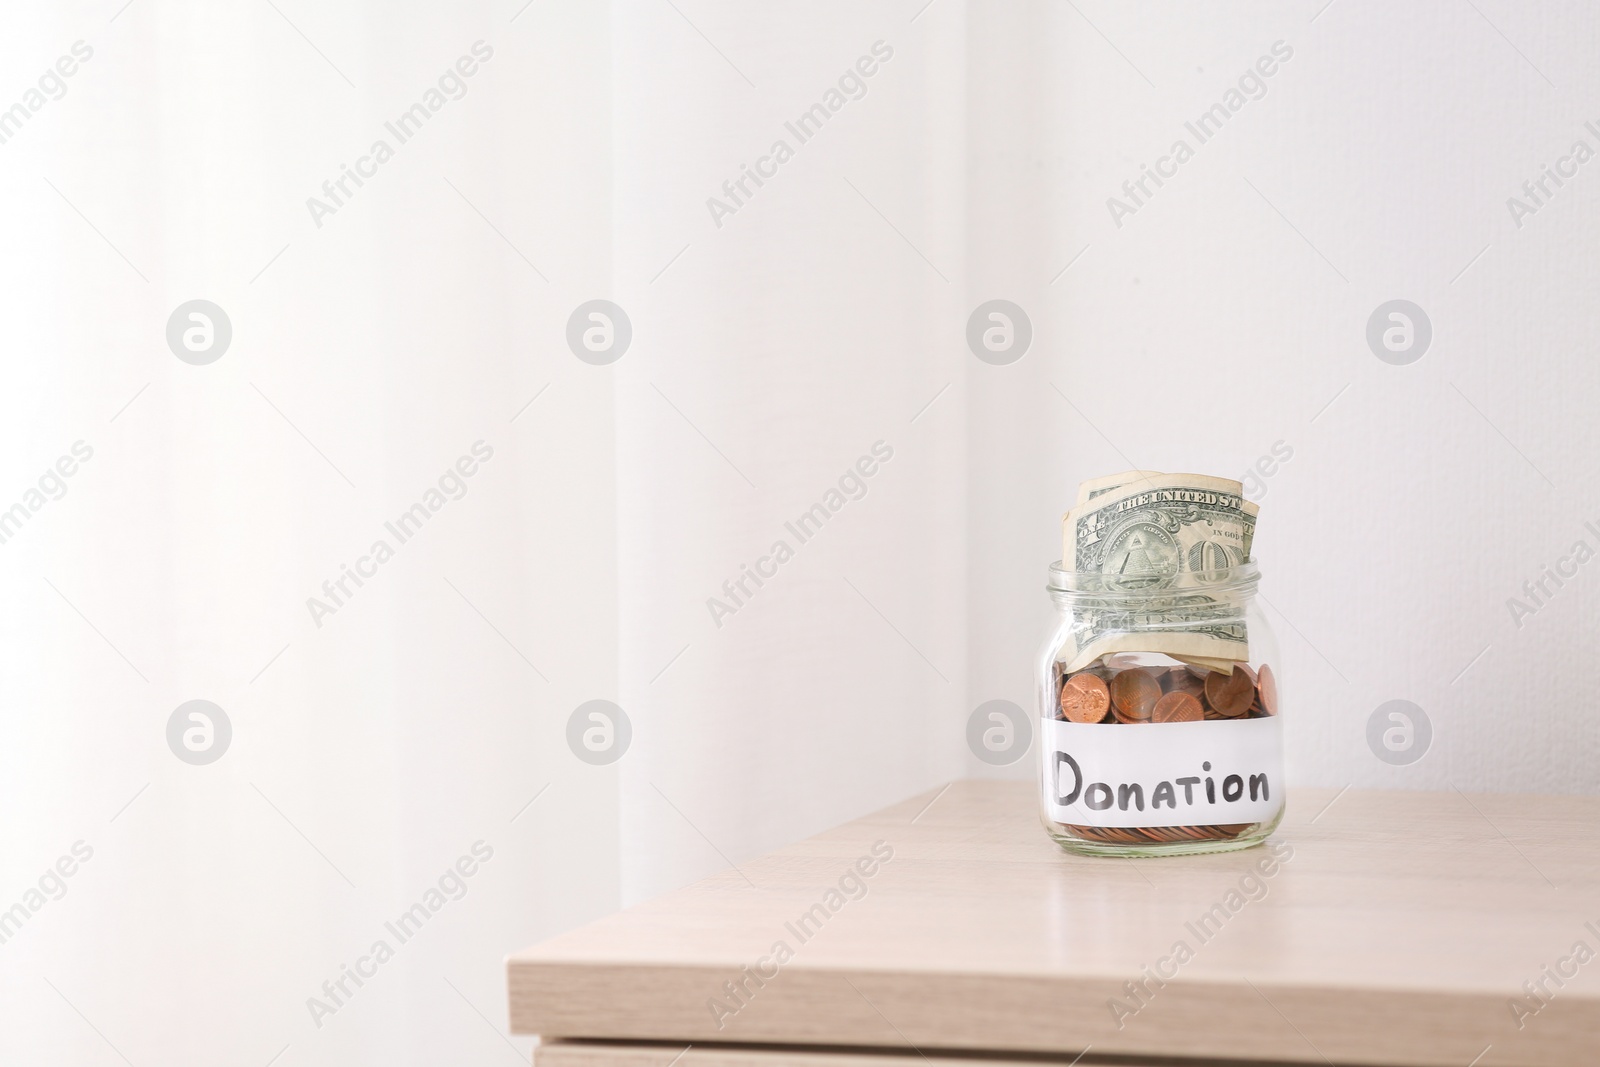 Photo of Glass jar with money and label DONATION on table against light background. Space for text